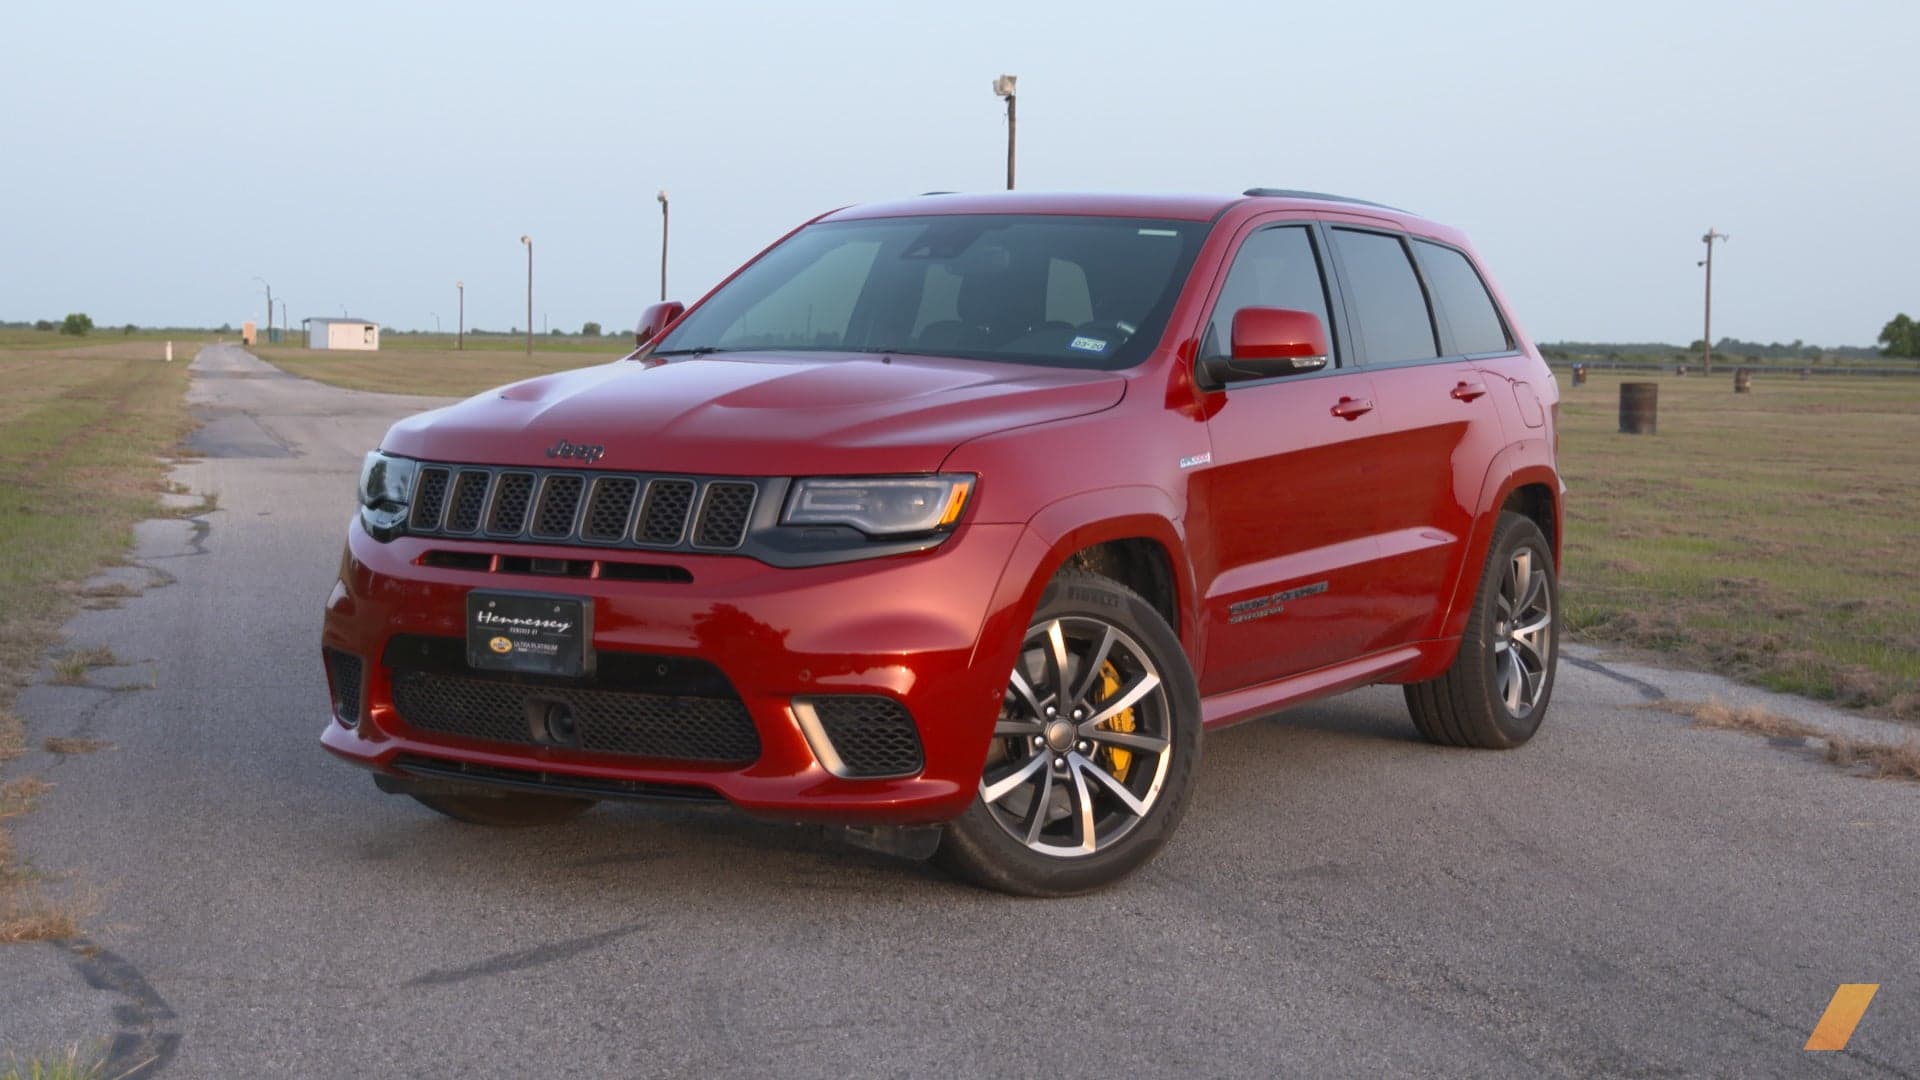 Driving Hennessey’s 1,000-HP Jeep Grand Cherokee Trackhawk: More Hell for the AWD Hellcat